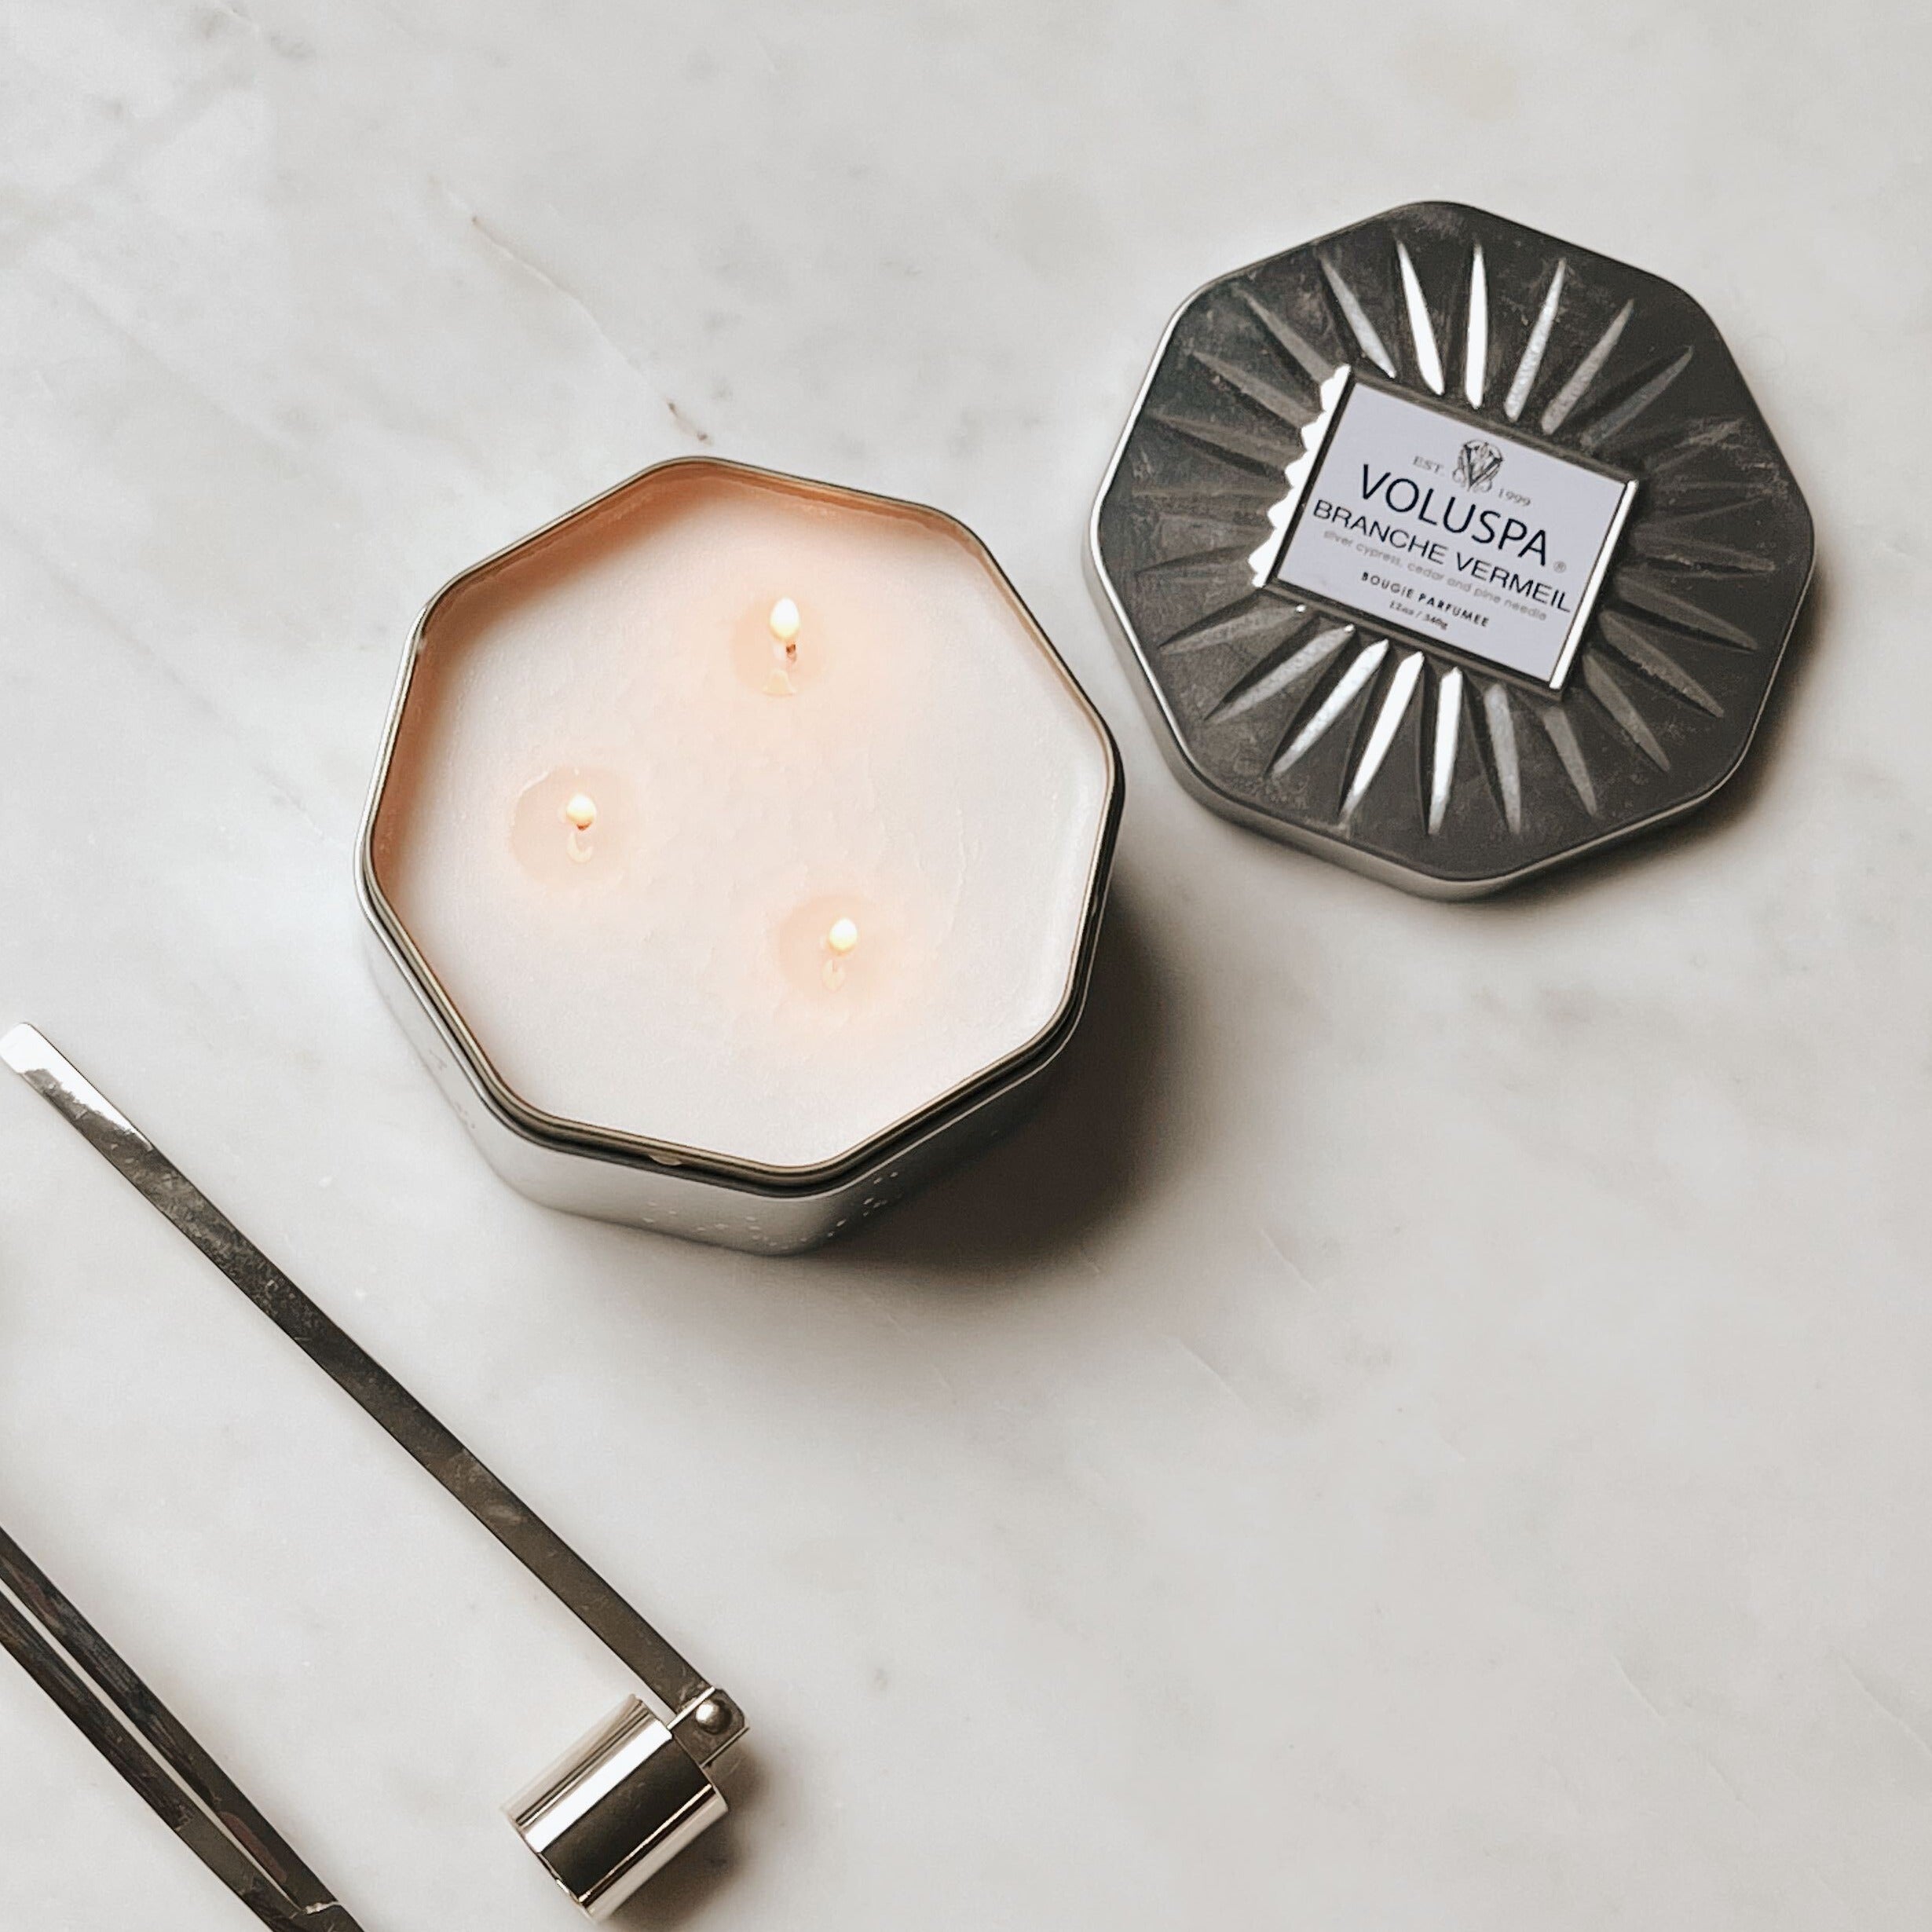 Hexagonal shaped tin with lit candle and silver candle snuffer beside it.